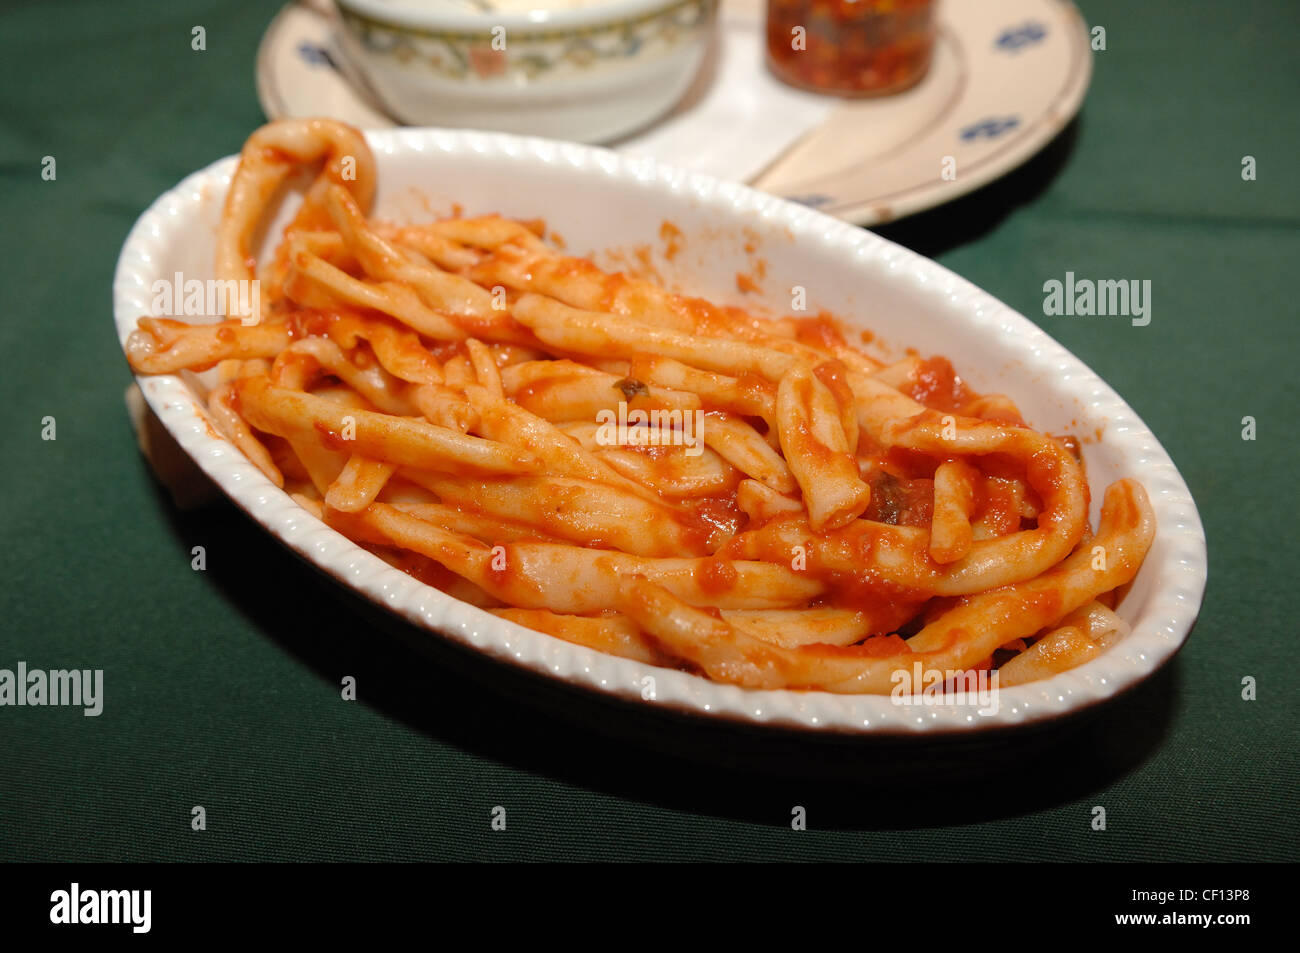 pasta with tomato sauce typical of southern Italy Stock Photo